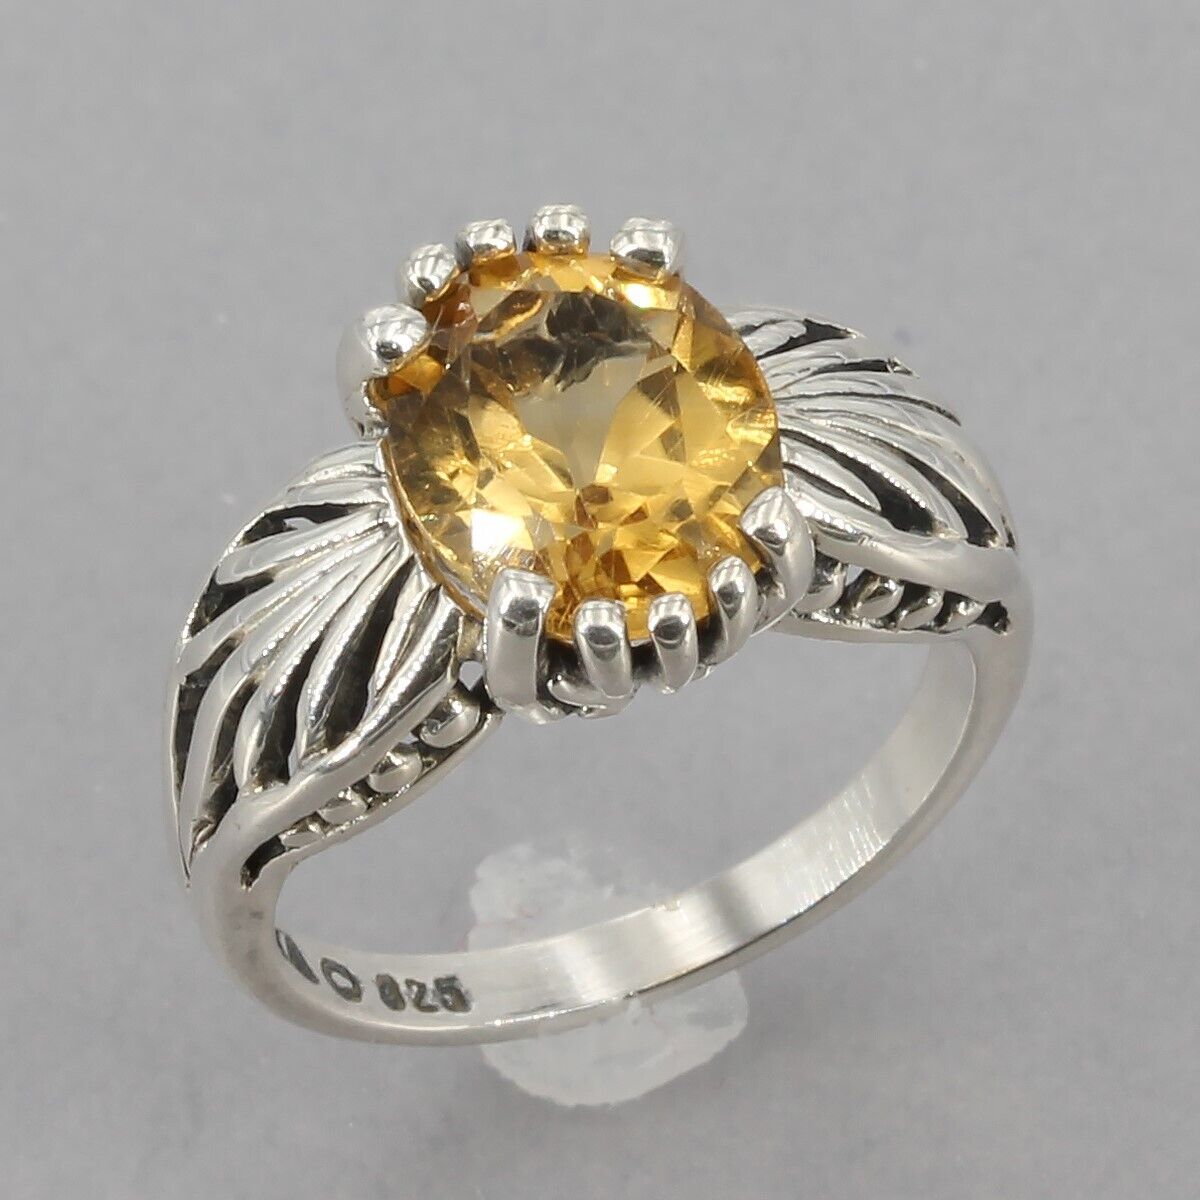 Signed Kabana Sterling Silver Oval Citrine Solitaire Ring Size 5